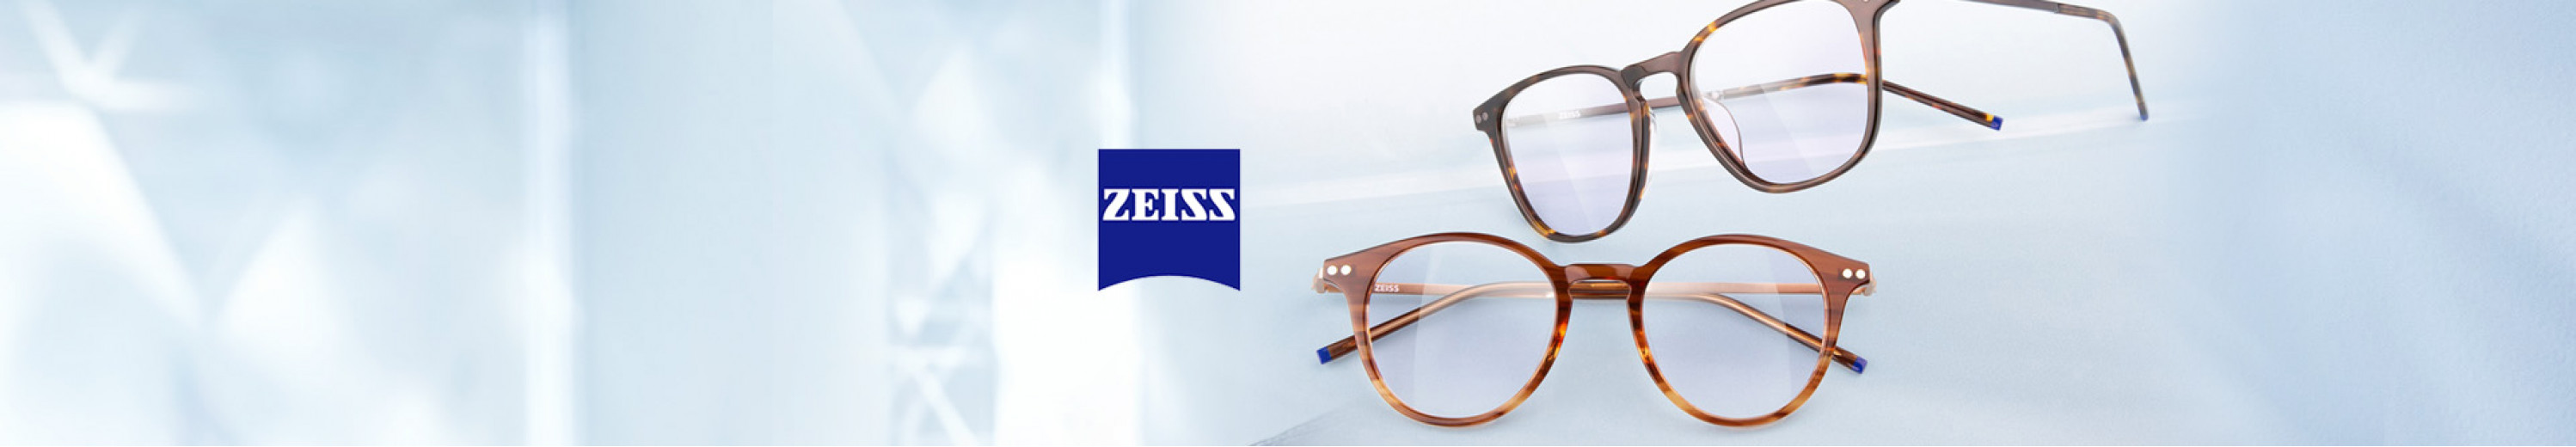 Zeiss Glasses and Eyewear